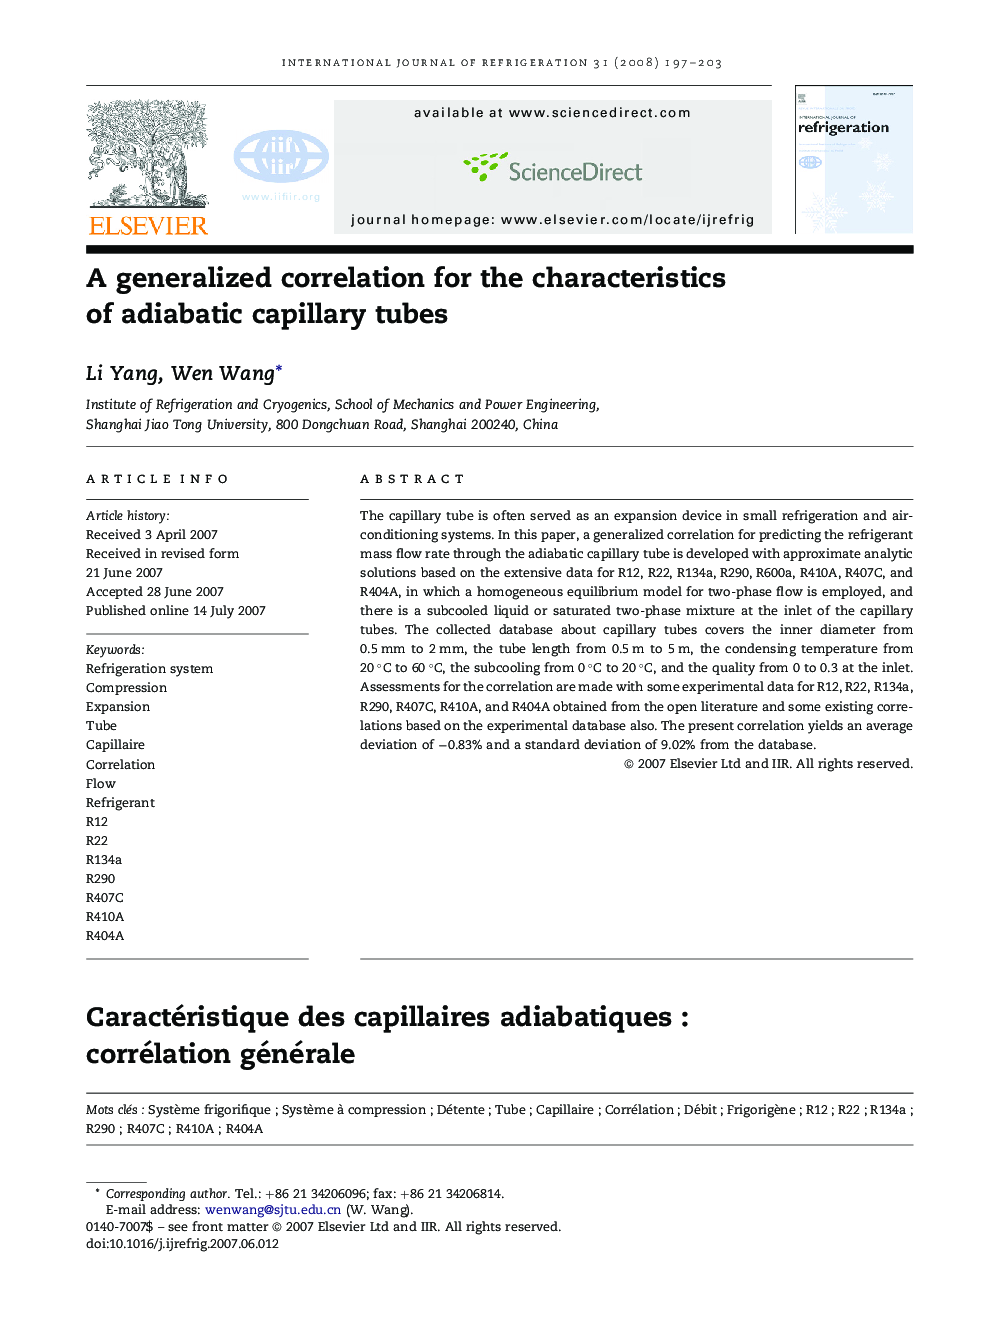 A generalized correlation for the characteristics of adiabatic capillary tubes